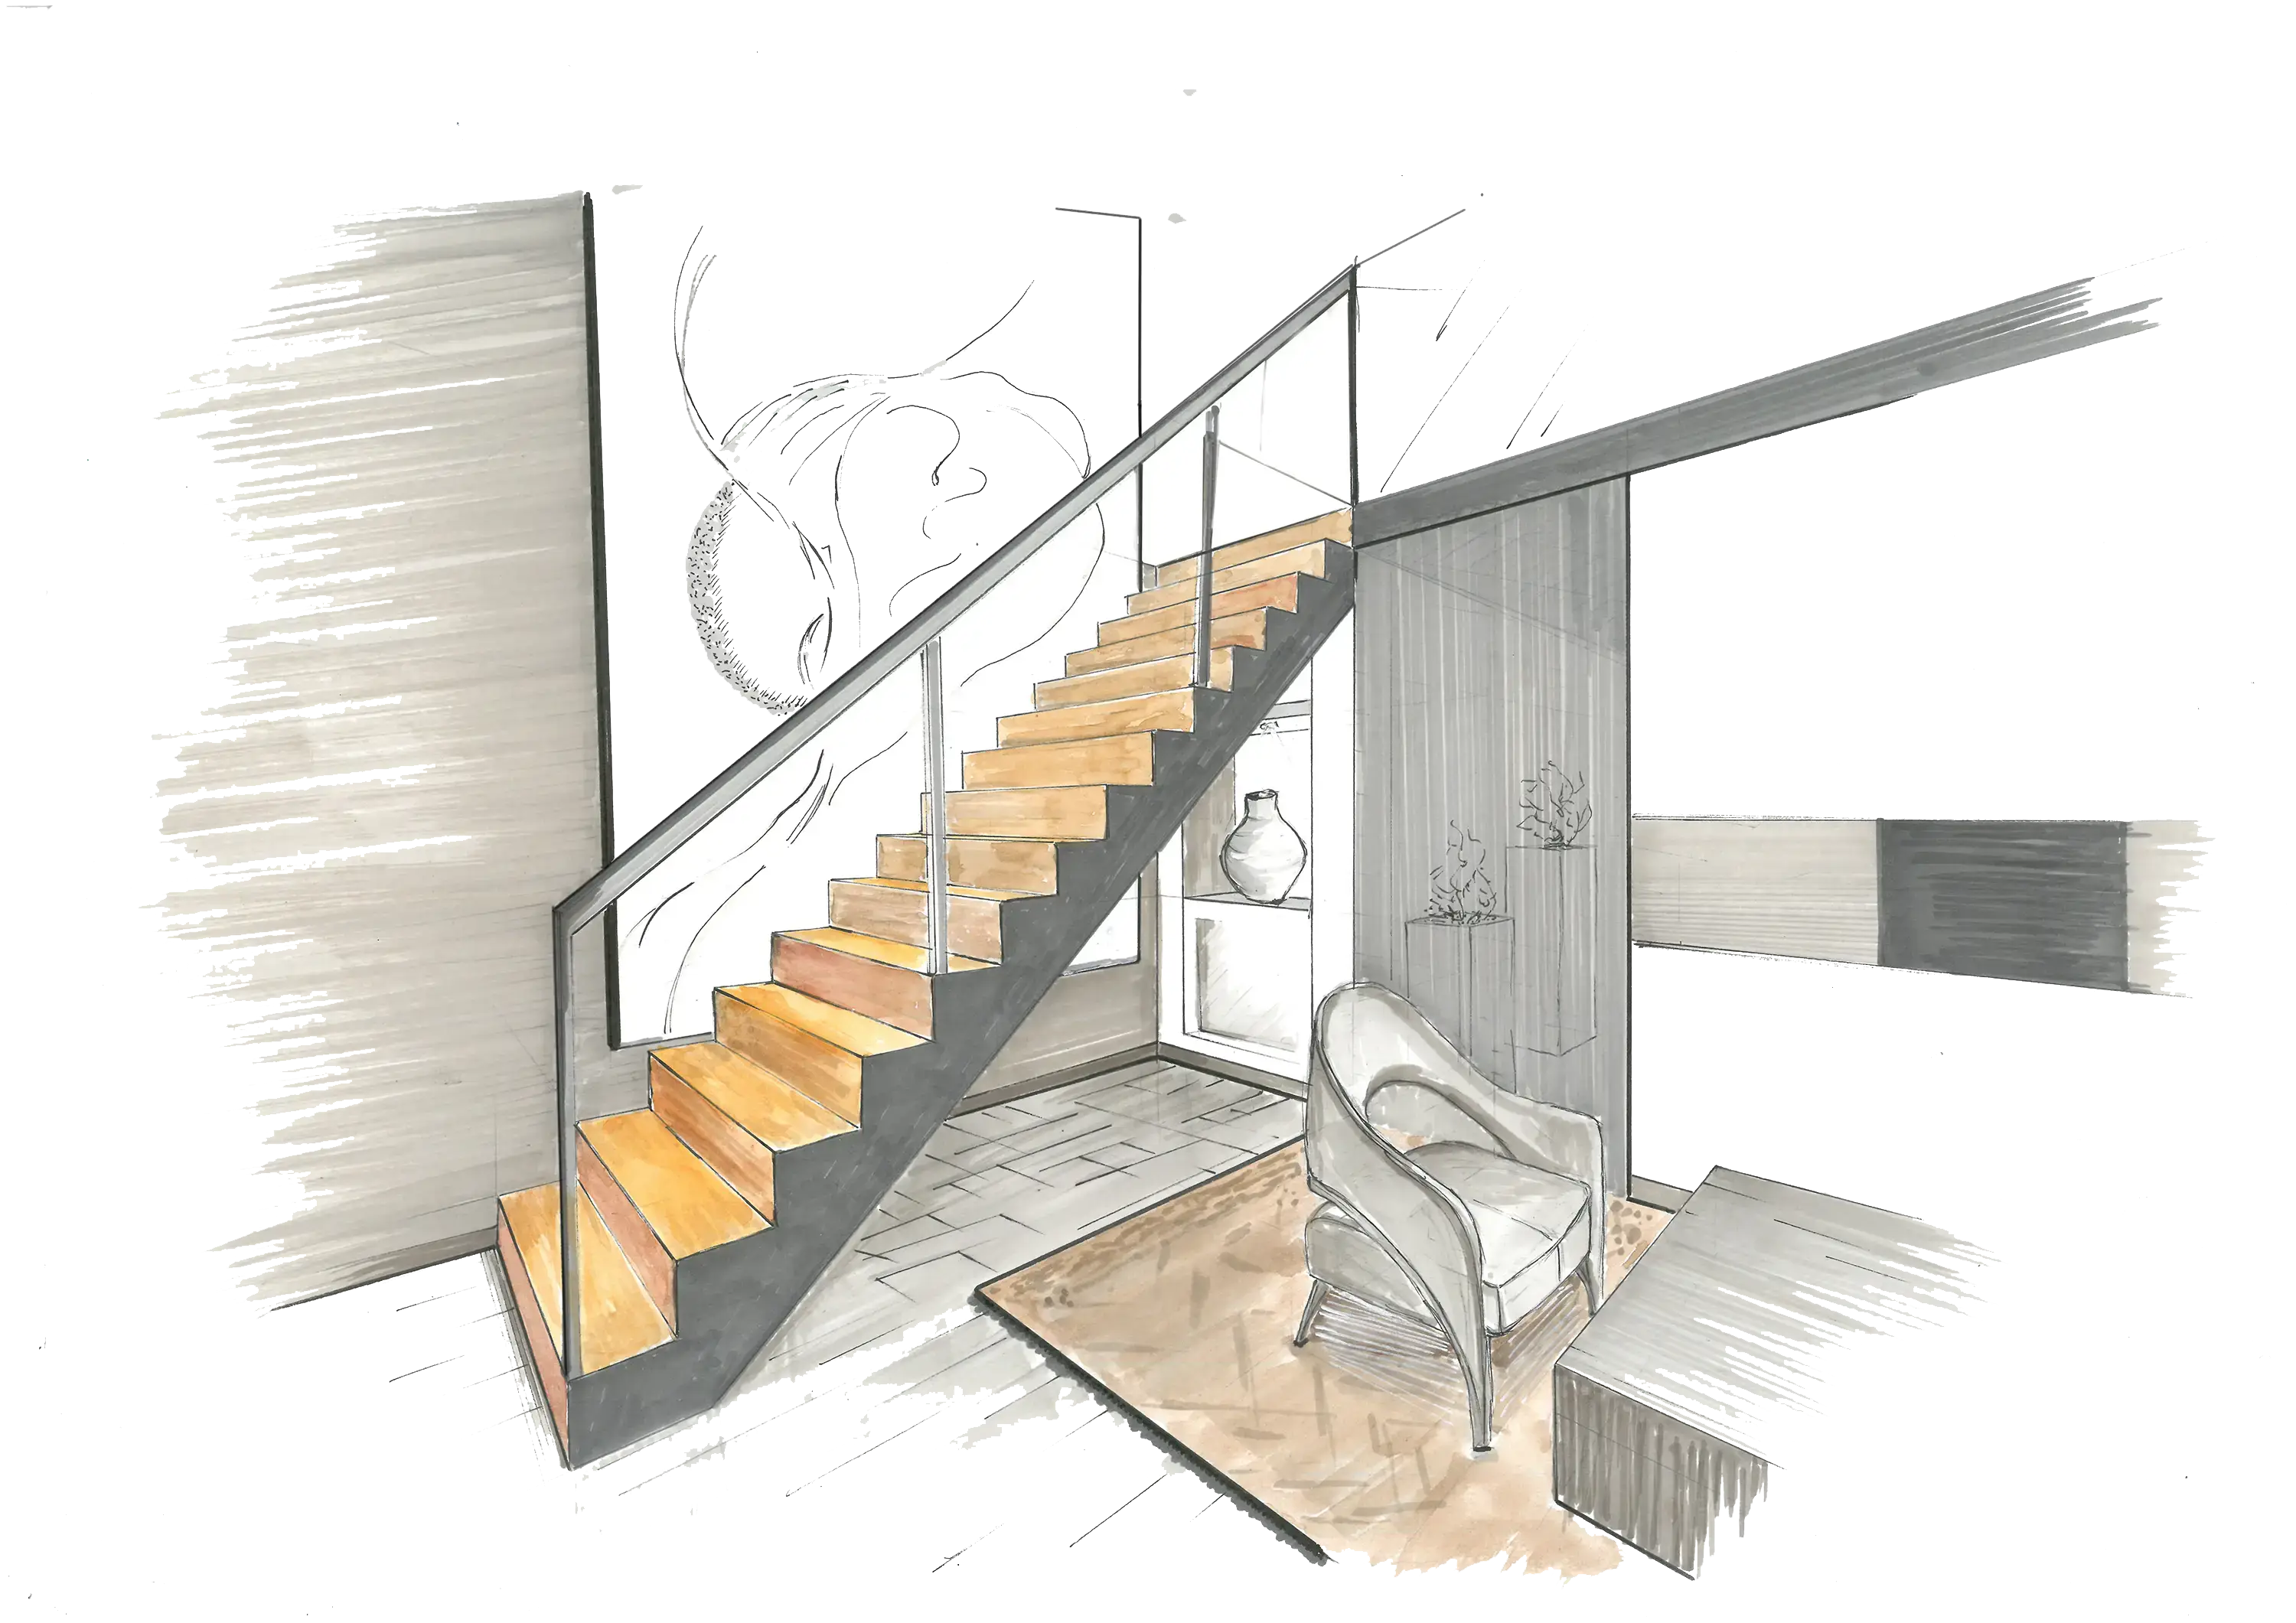 Sketch of a living room and view of a staircase. Interior design project by Elles Interior Design.